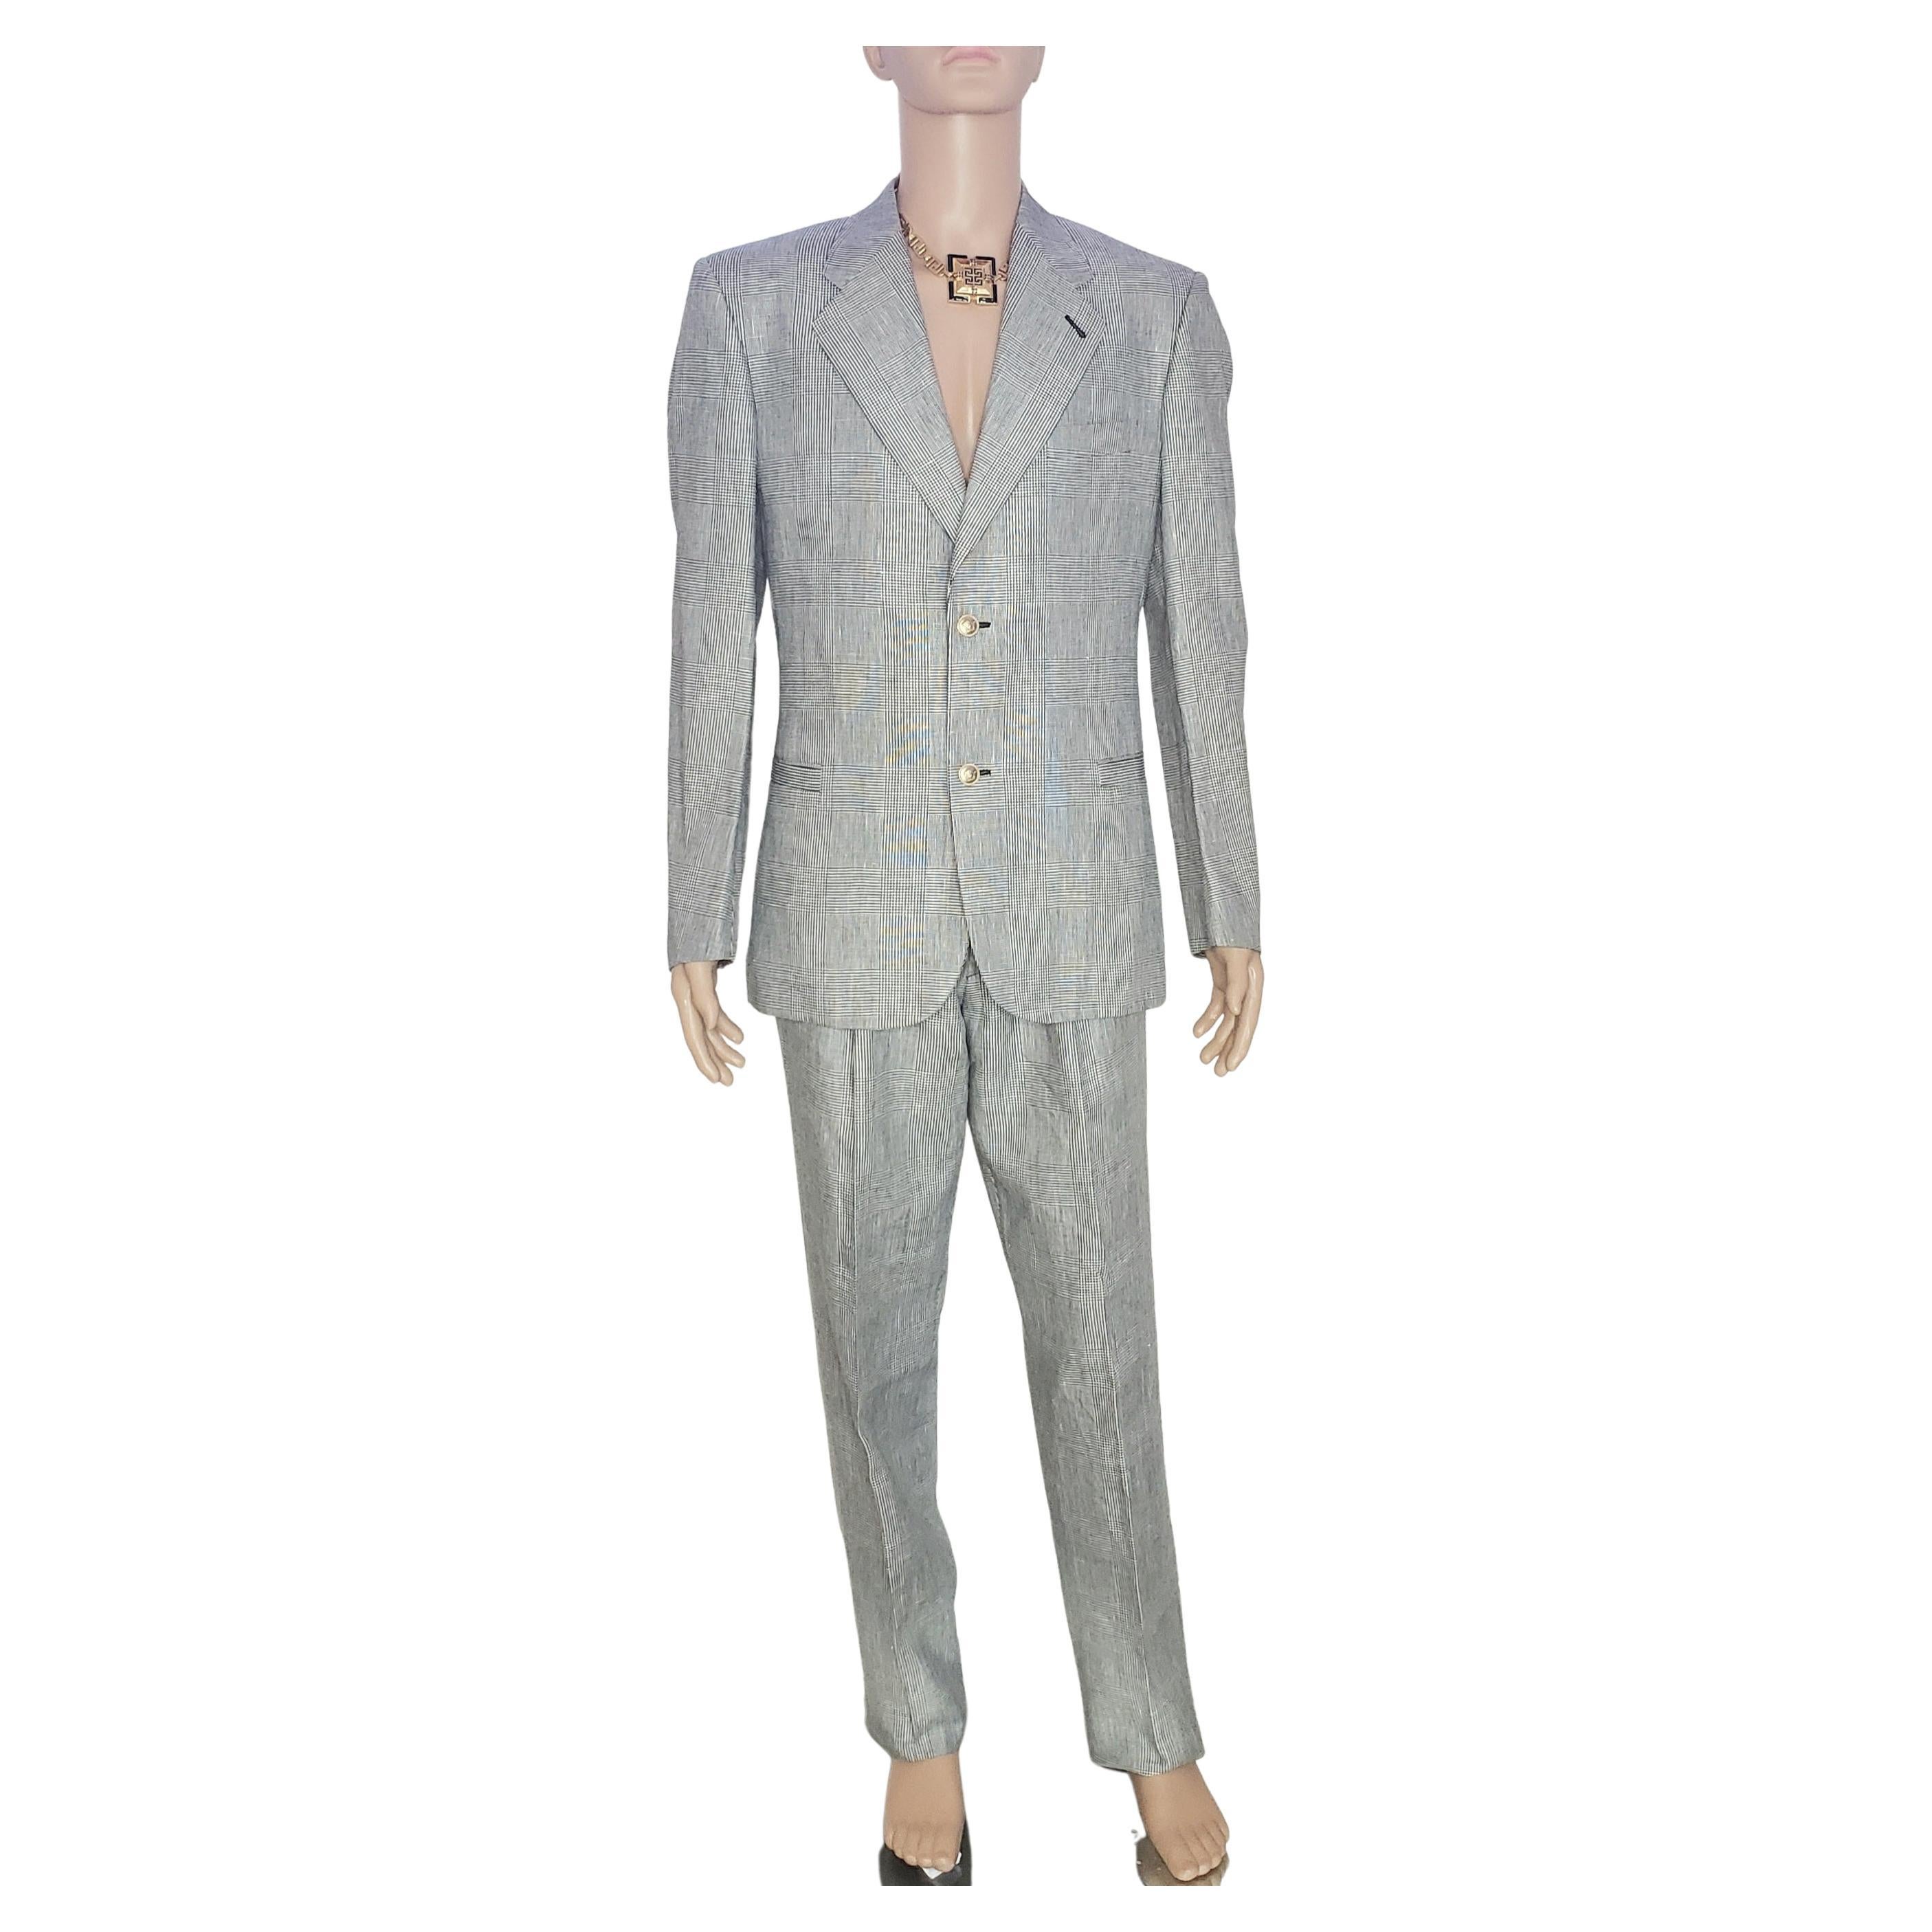 VERSACE S/S 2012 look # 2 BRAND NEW GRAY SUIT 48 - 38 (M) For Sale